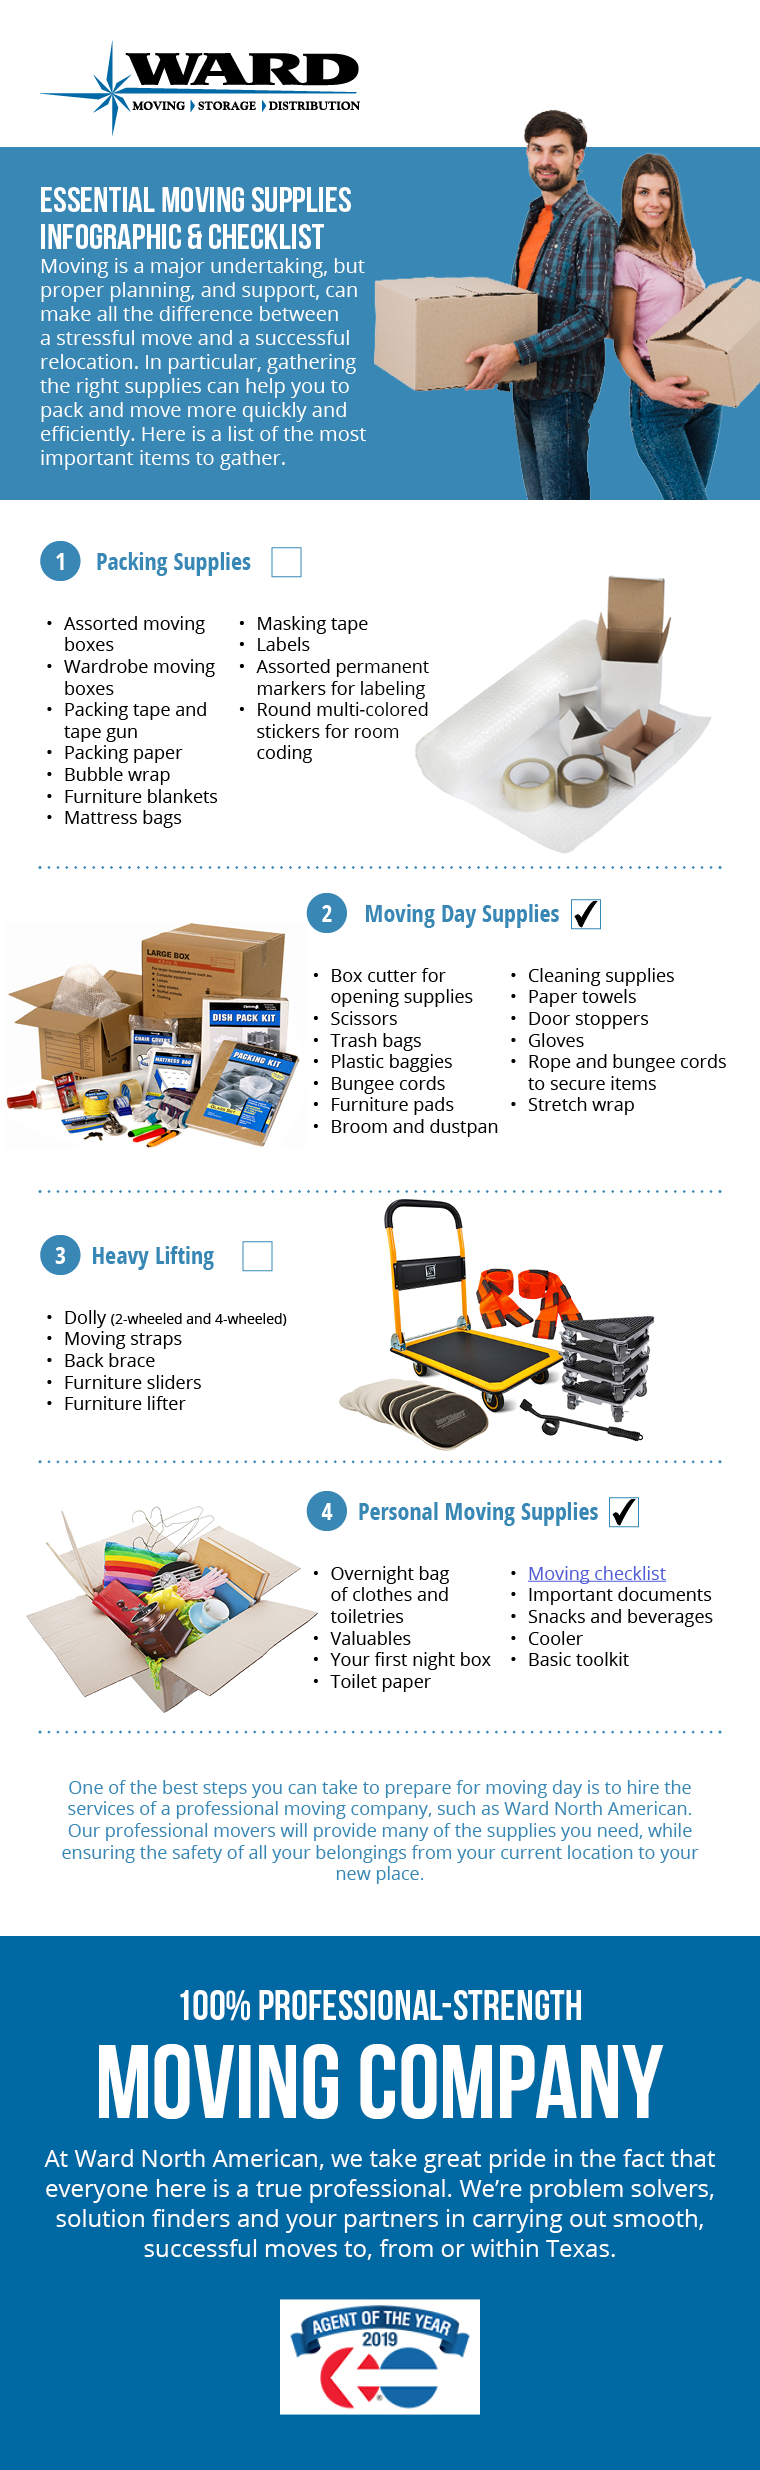 The essential moving supplies checklist infographic